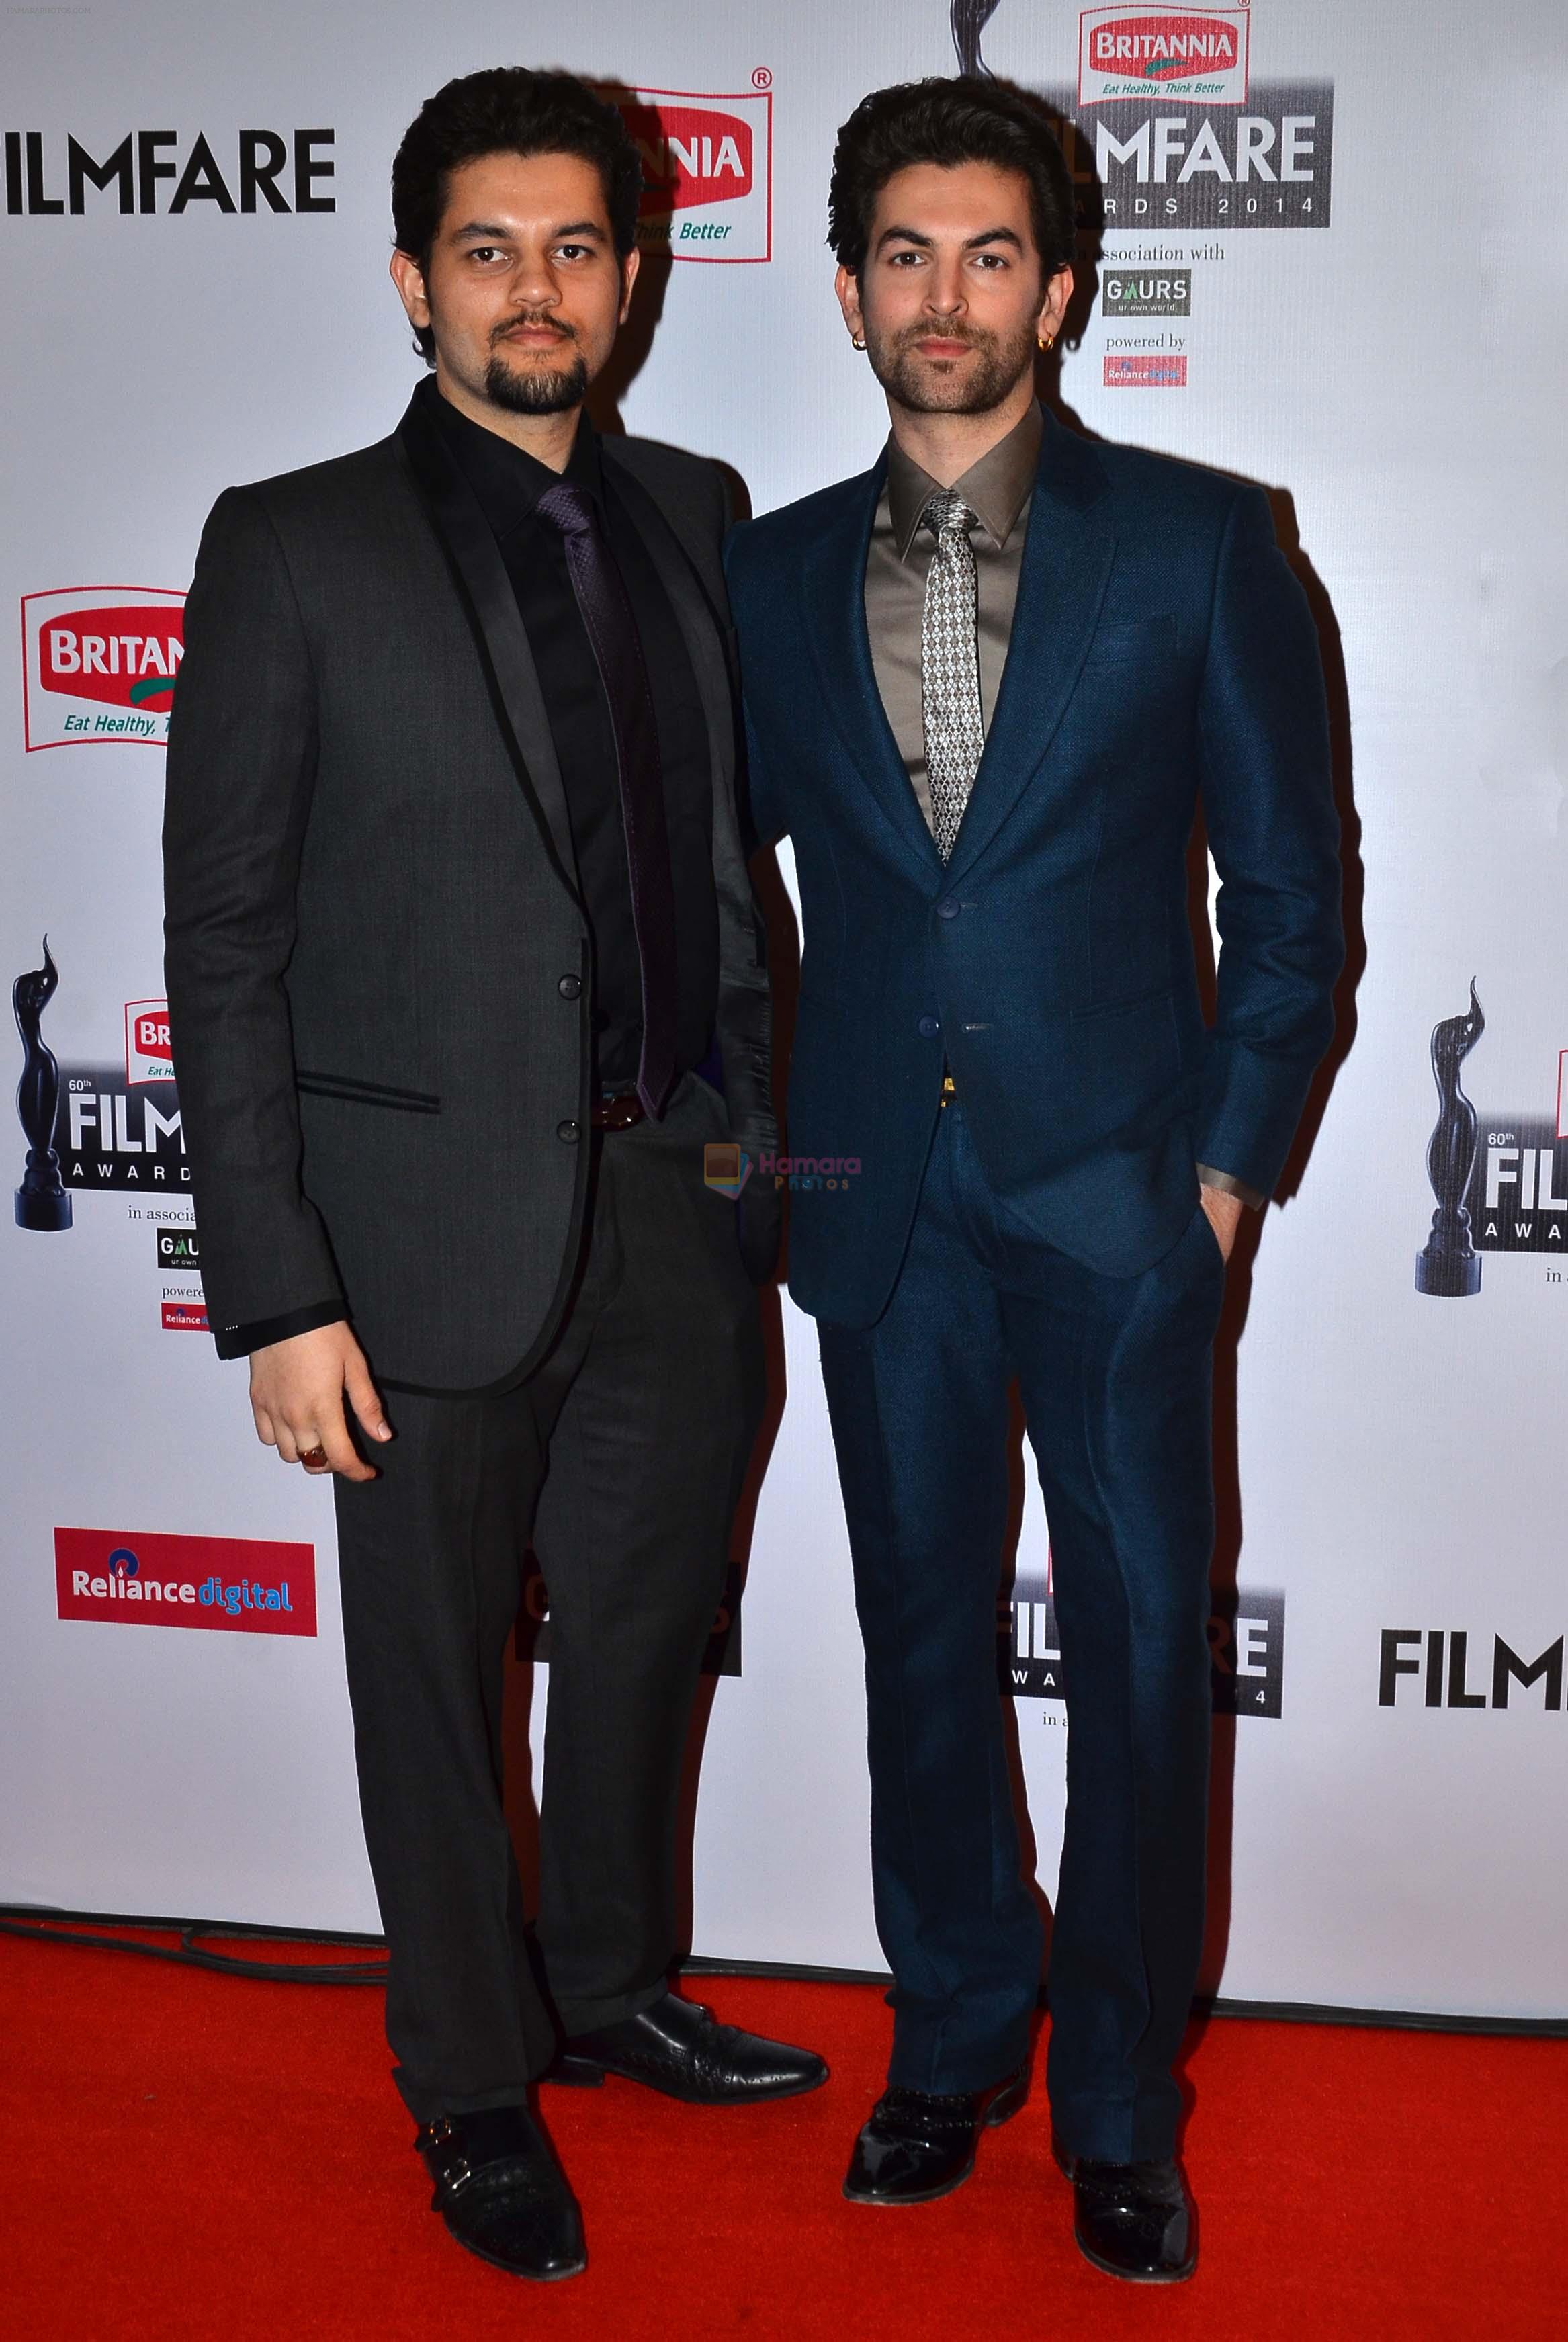 Neil Nitin Mukesh with brother Naman graces the red carpet at the 60th Britannia Filmfare Awards